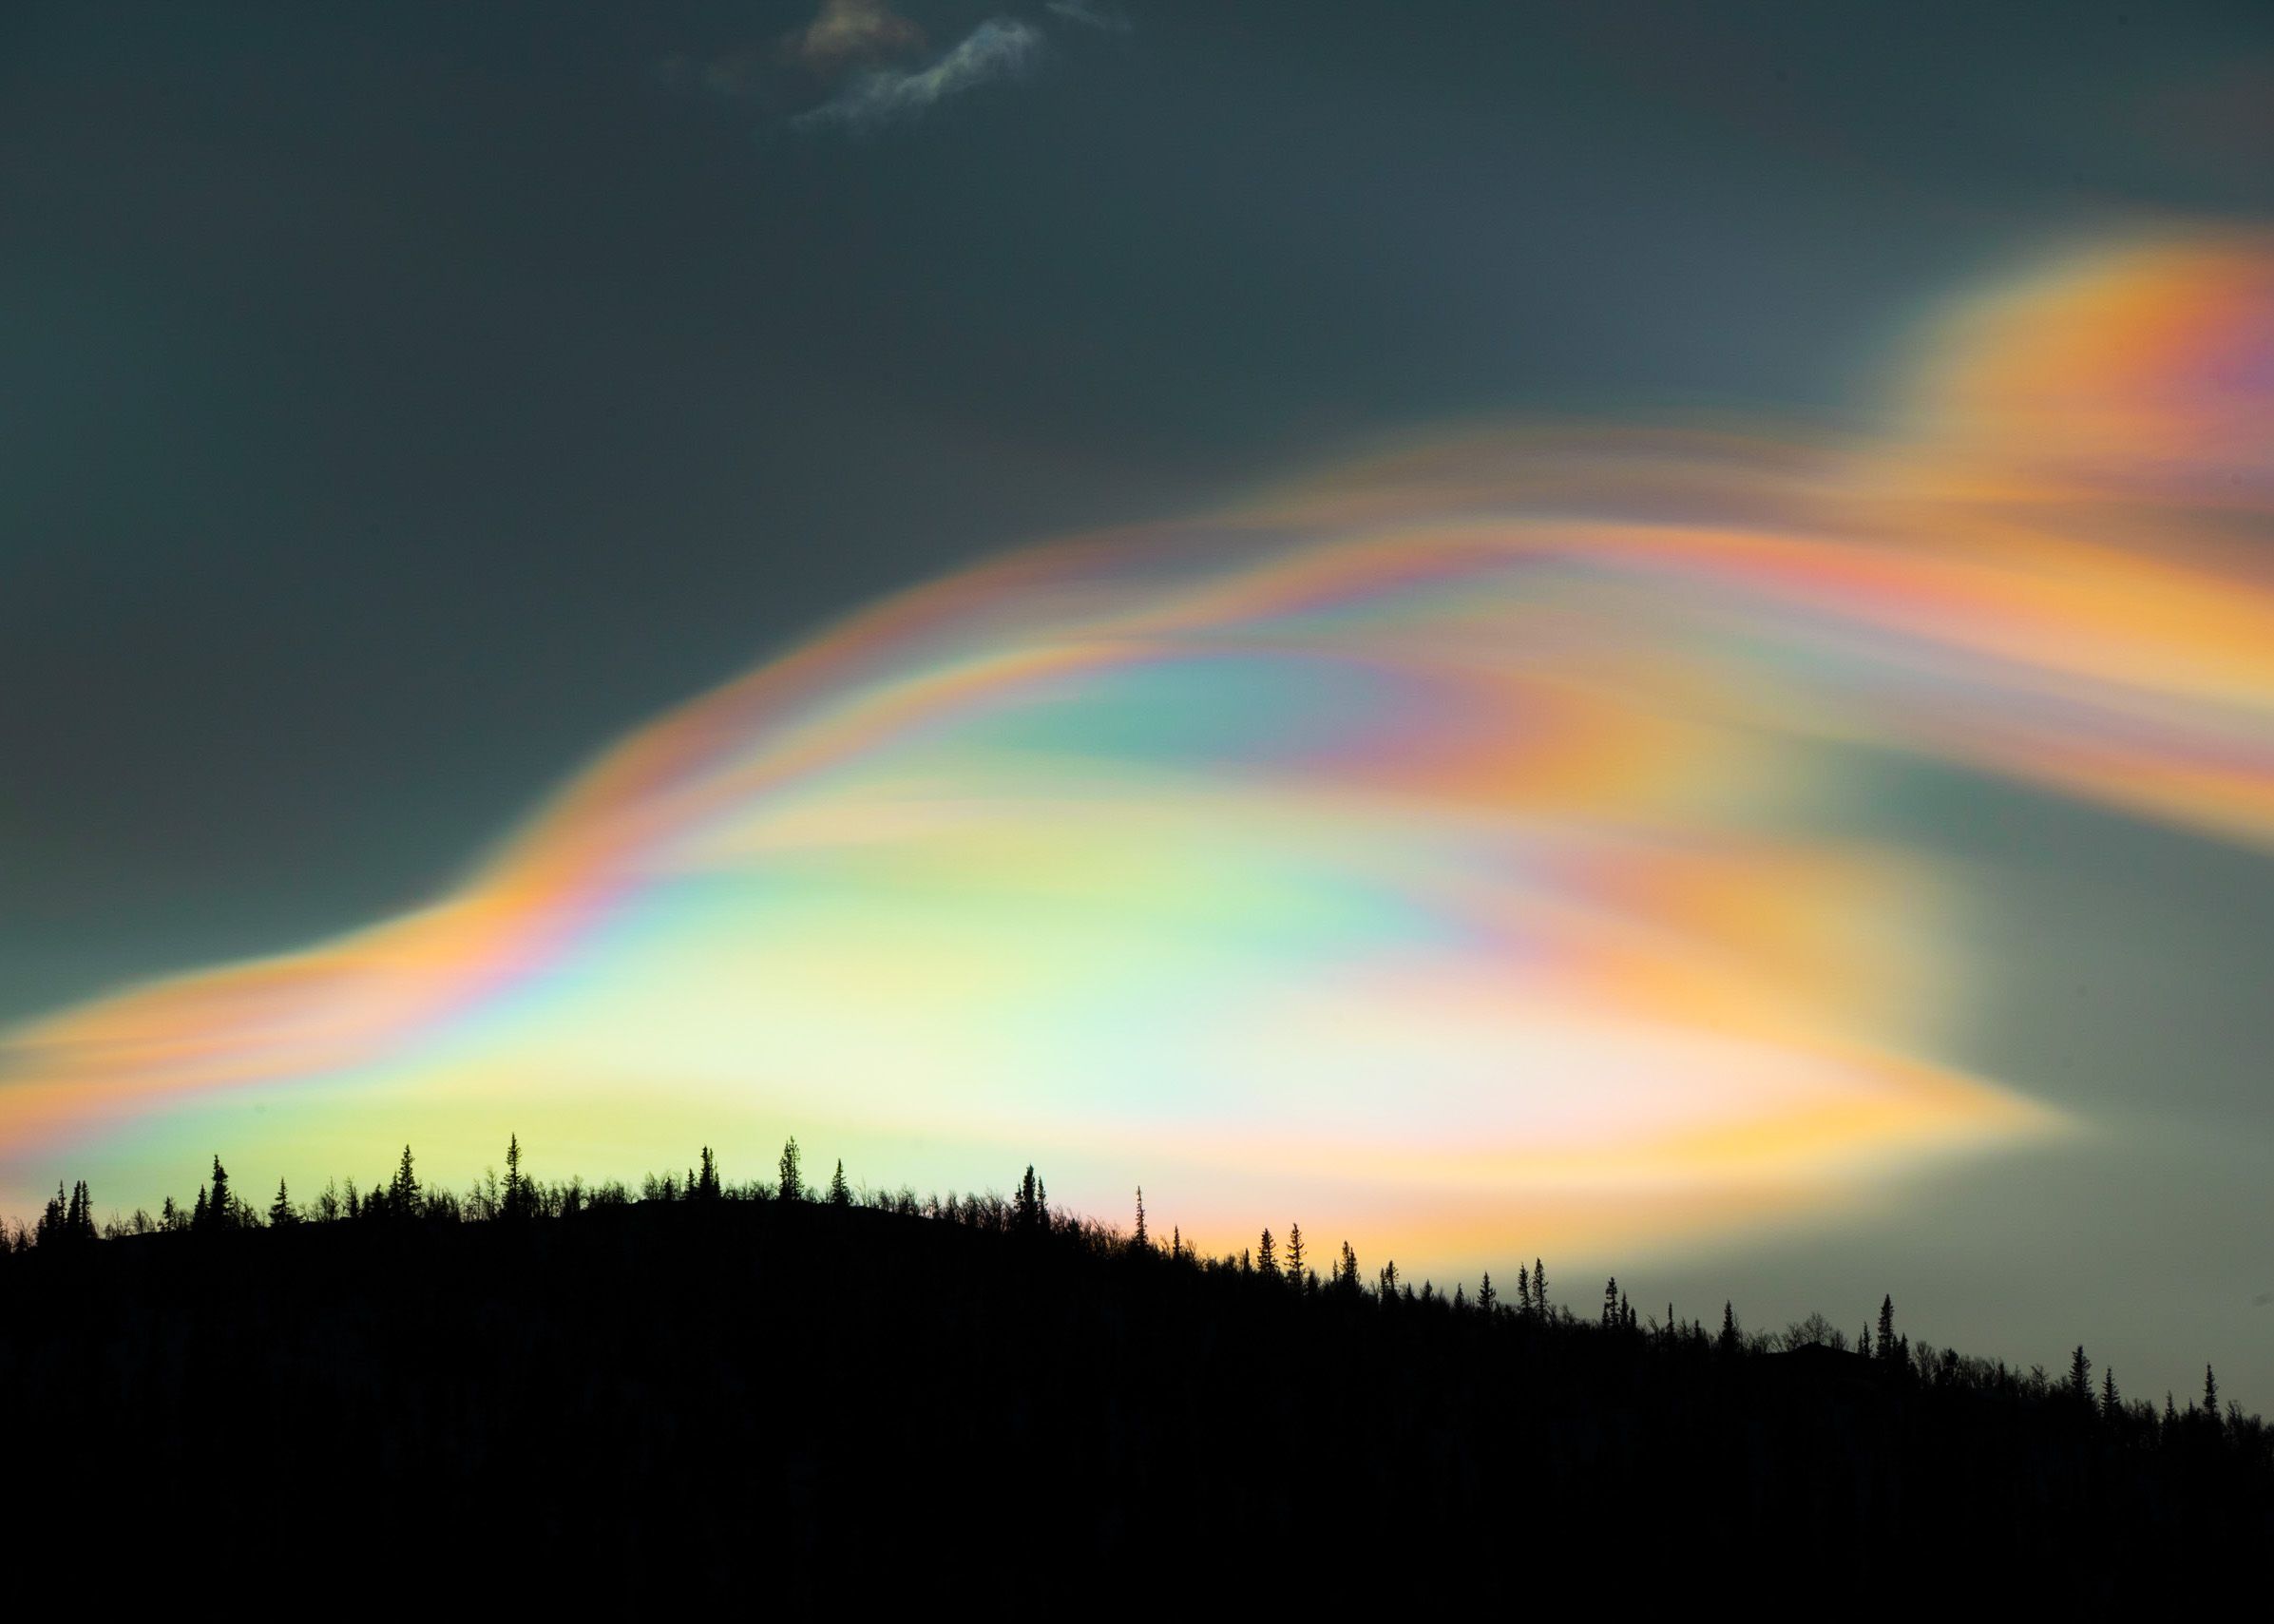 multicolored stratospheric cloud over silhouetted pine trees